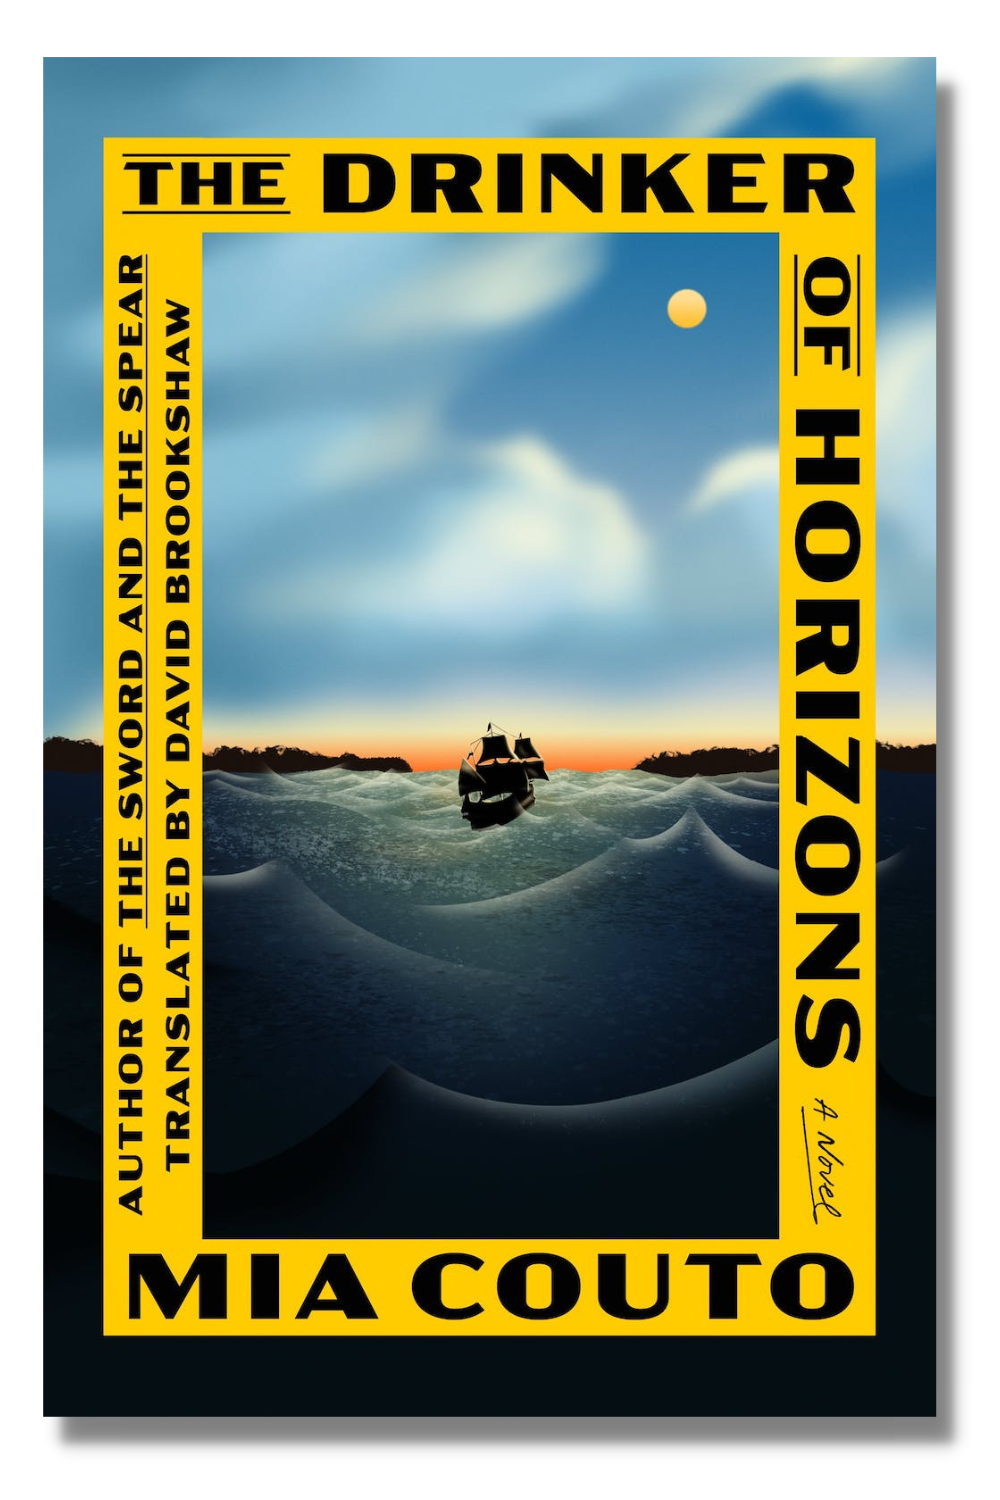 The cover of "The Drinker of Horizons"